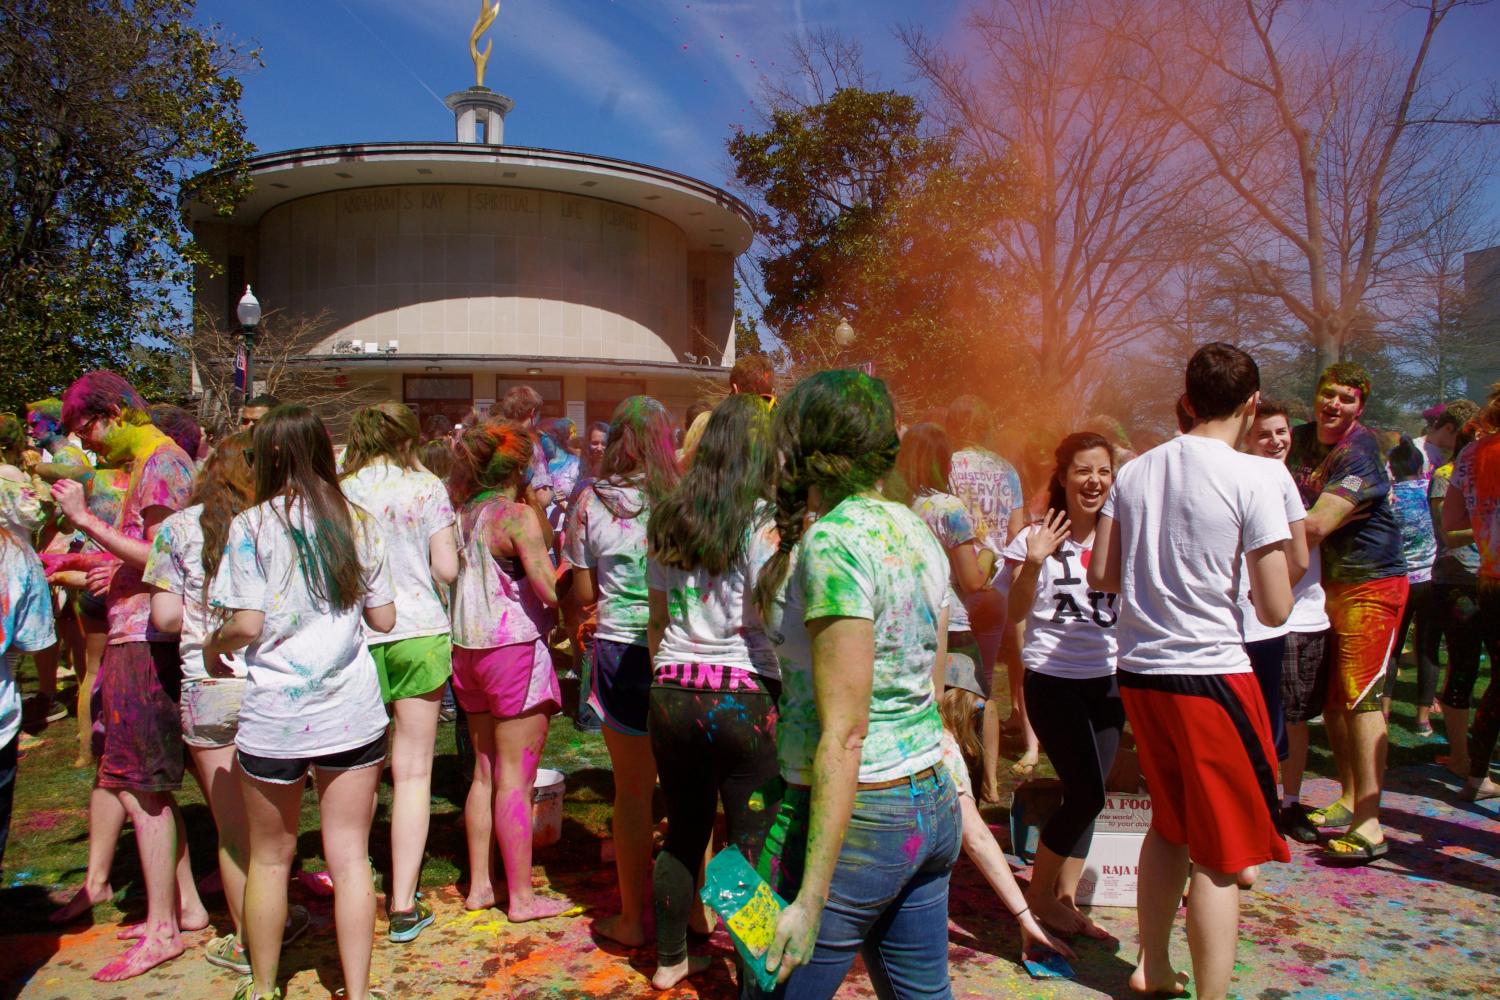 Holi originated in Hindu tradition but has become a trend on college campuses, including at AU on April 6.